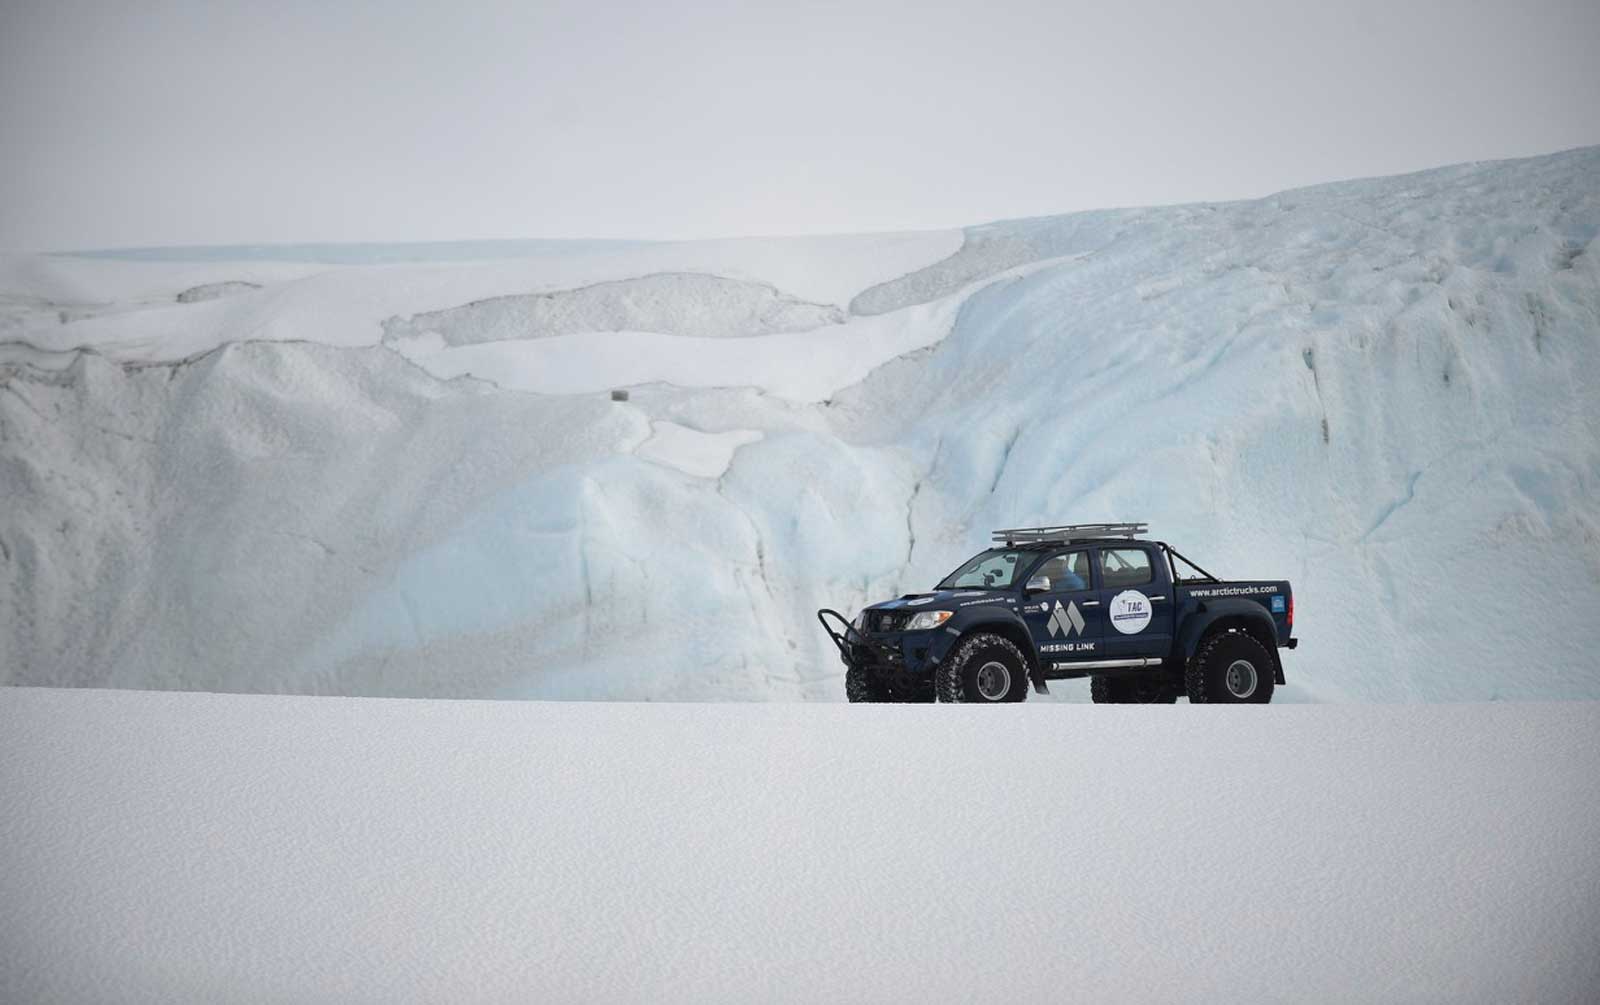 4x4 driving in the Arctic